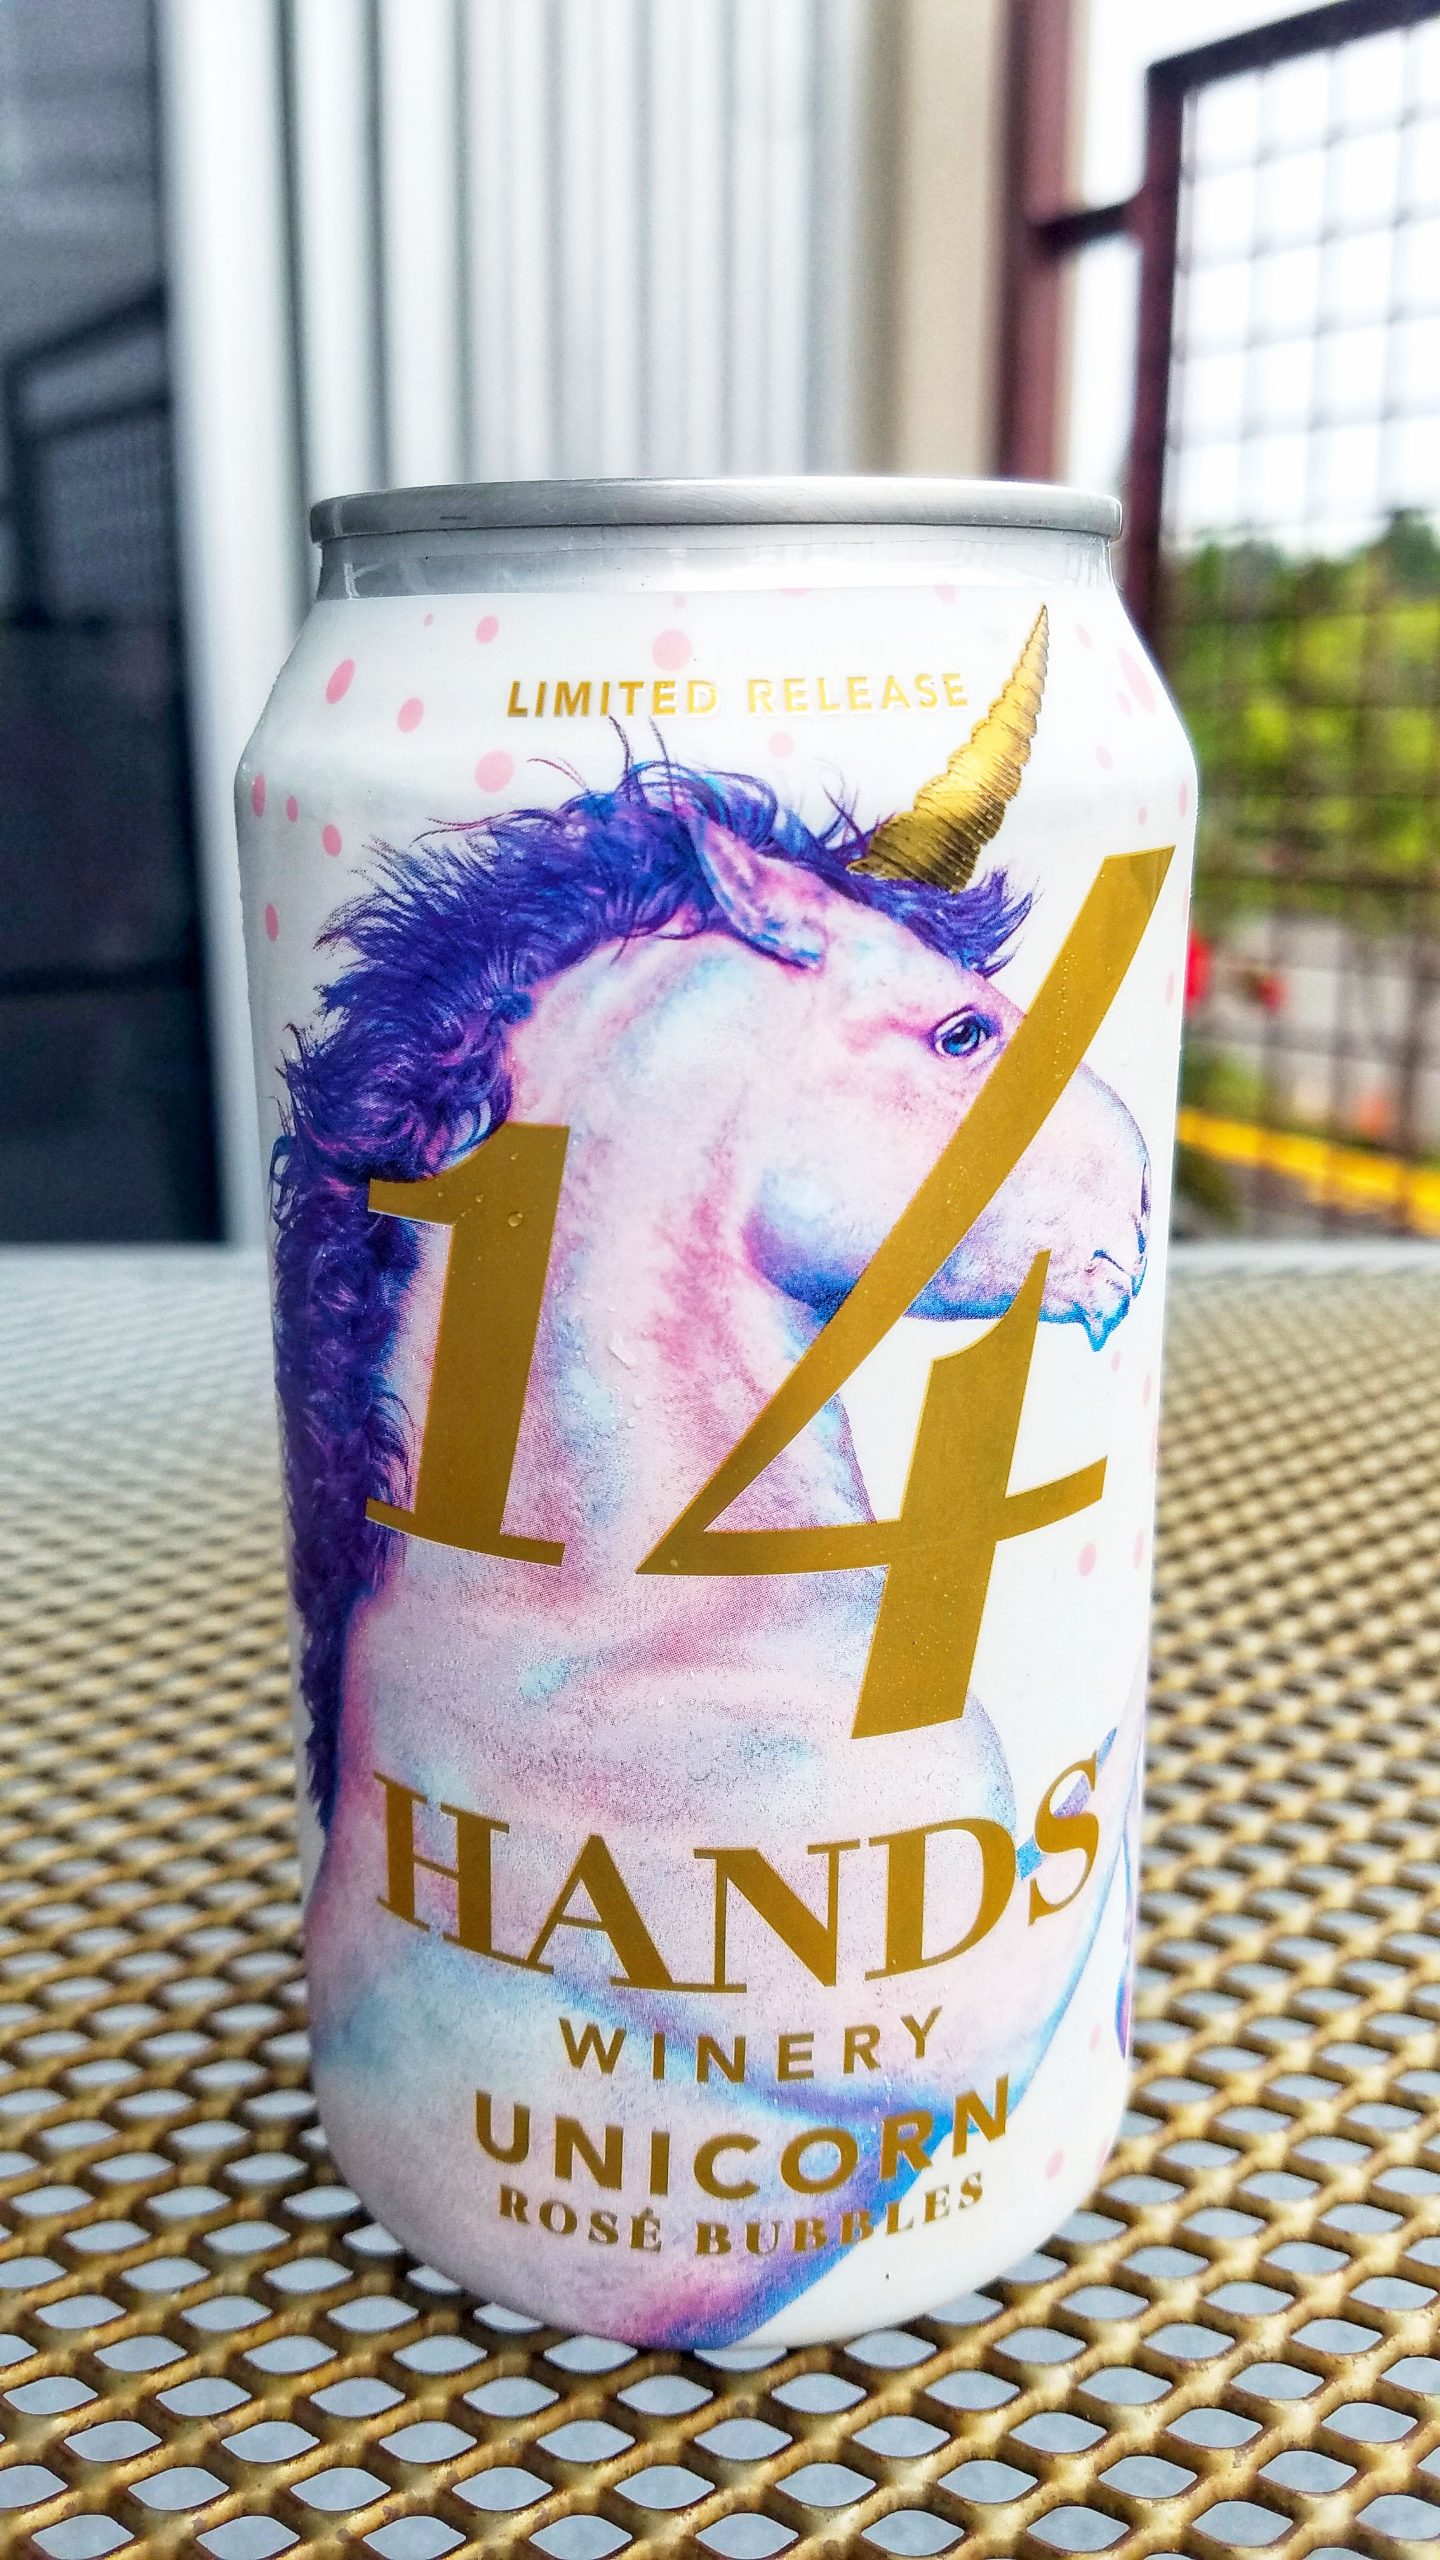 14 Hands Unicorn Rose Bubbles Limited Edition Release canned